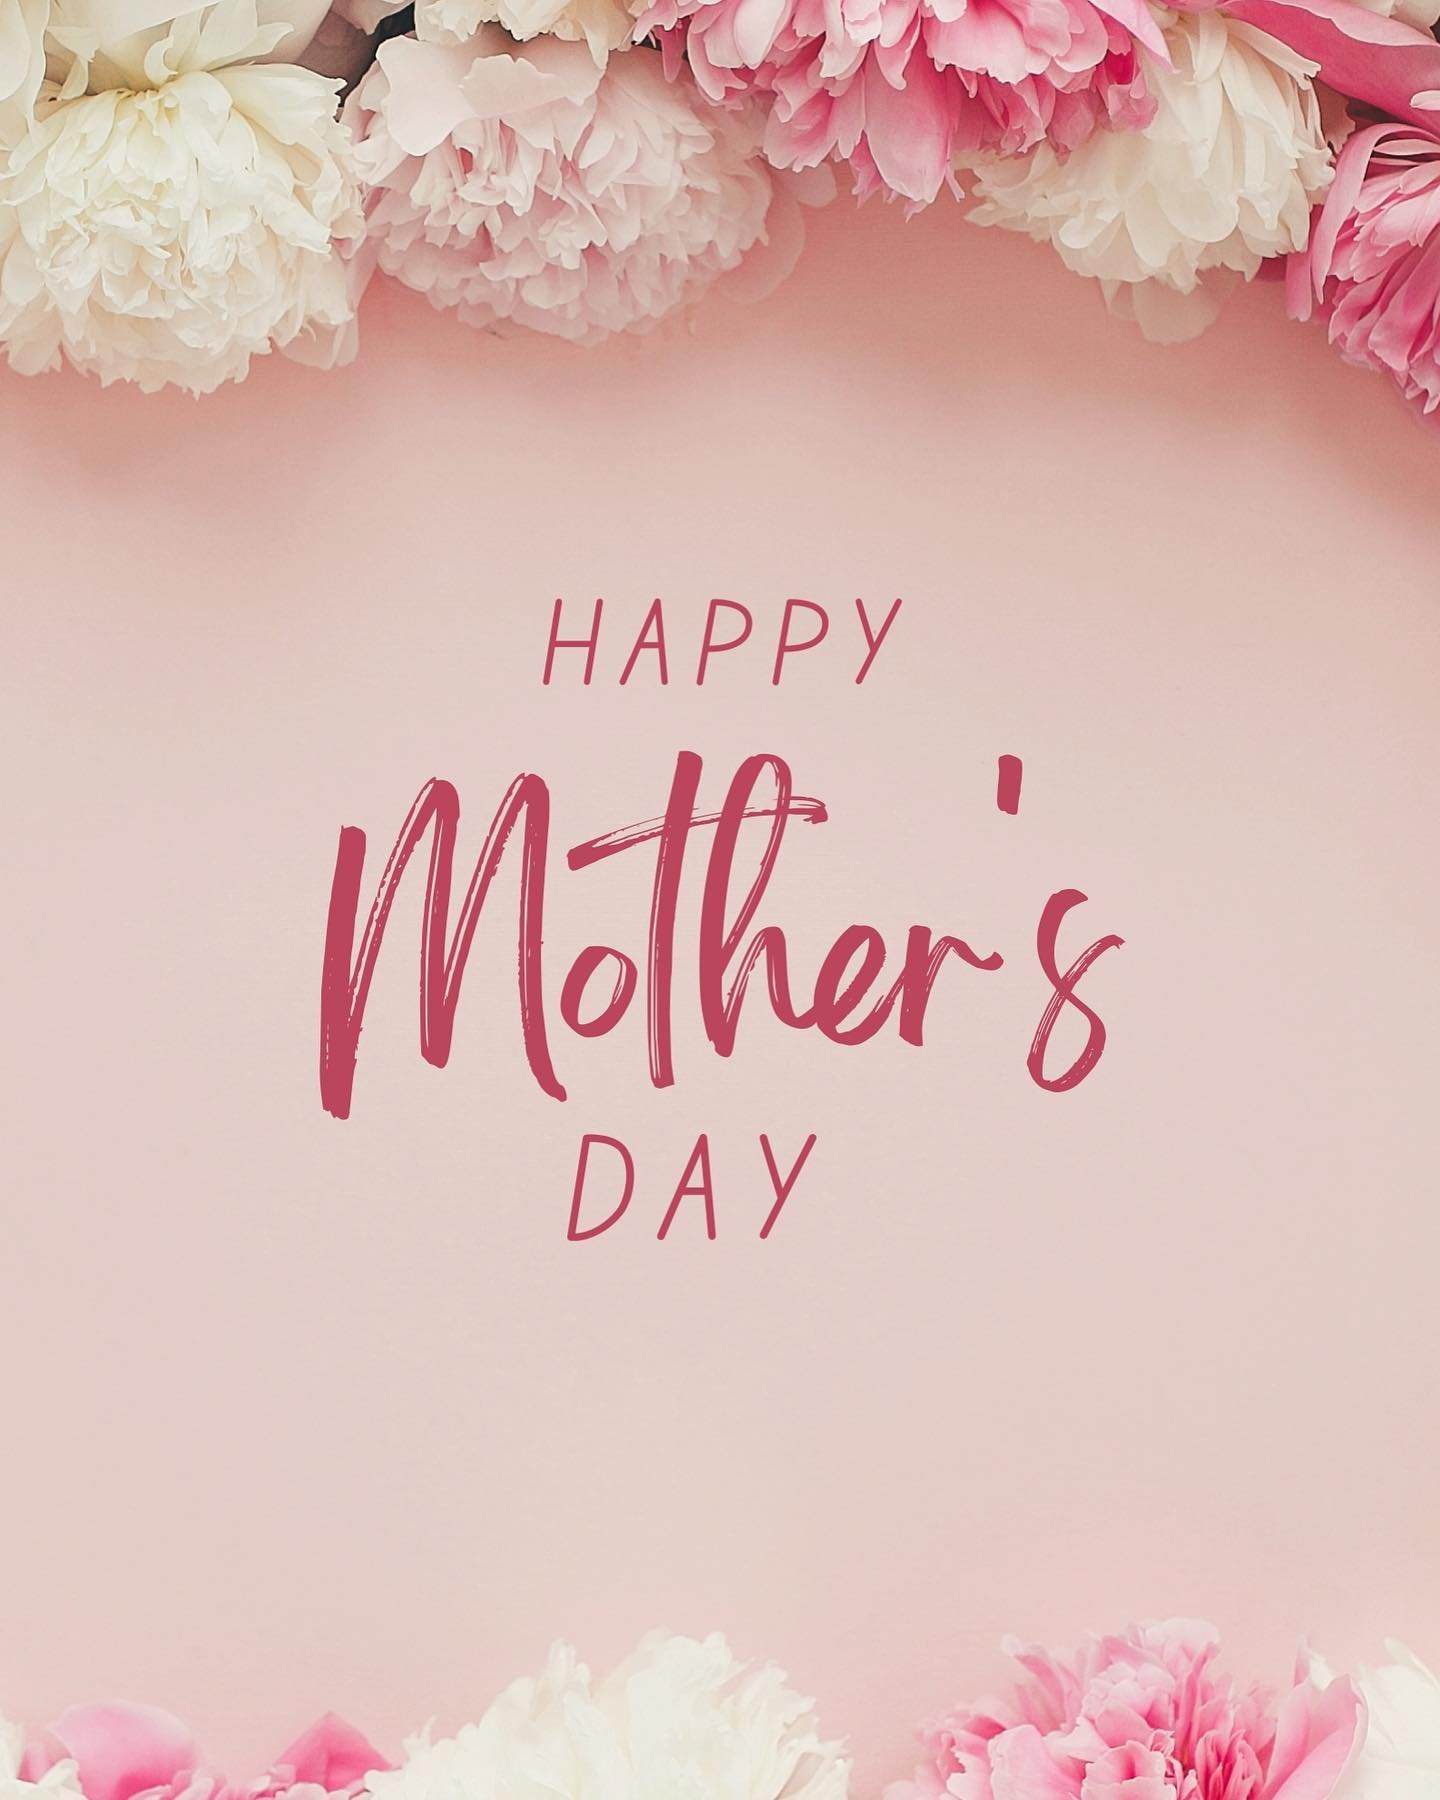 Wishing every mother a wonderful Mother&rsquo;s Day! 💐💐